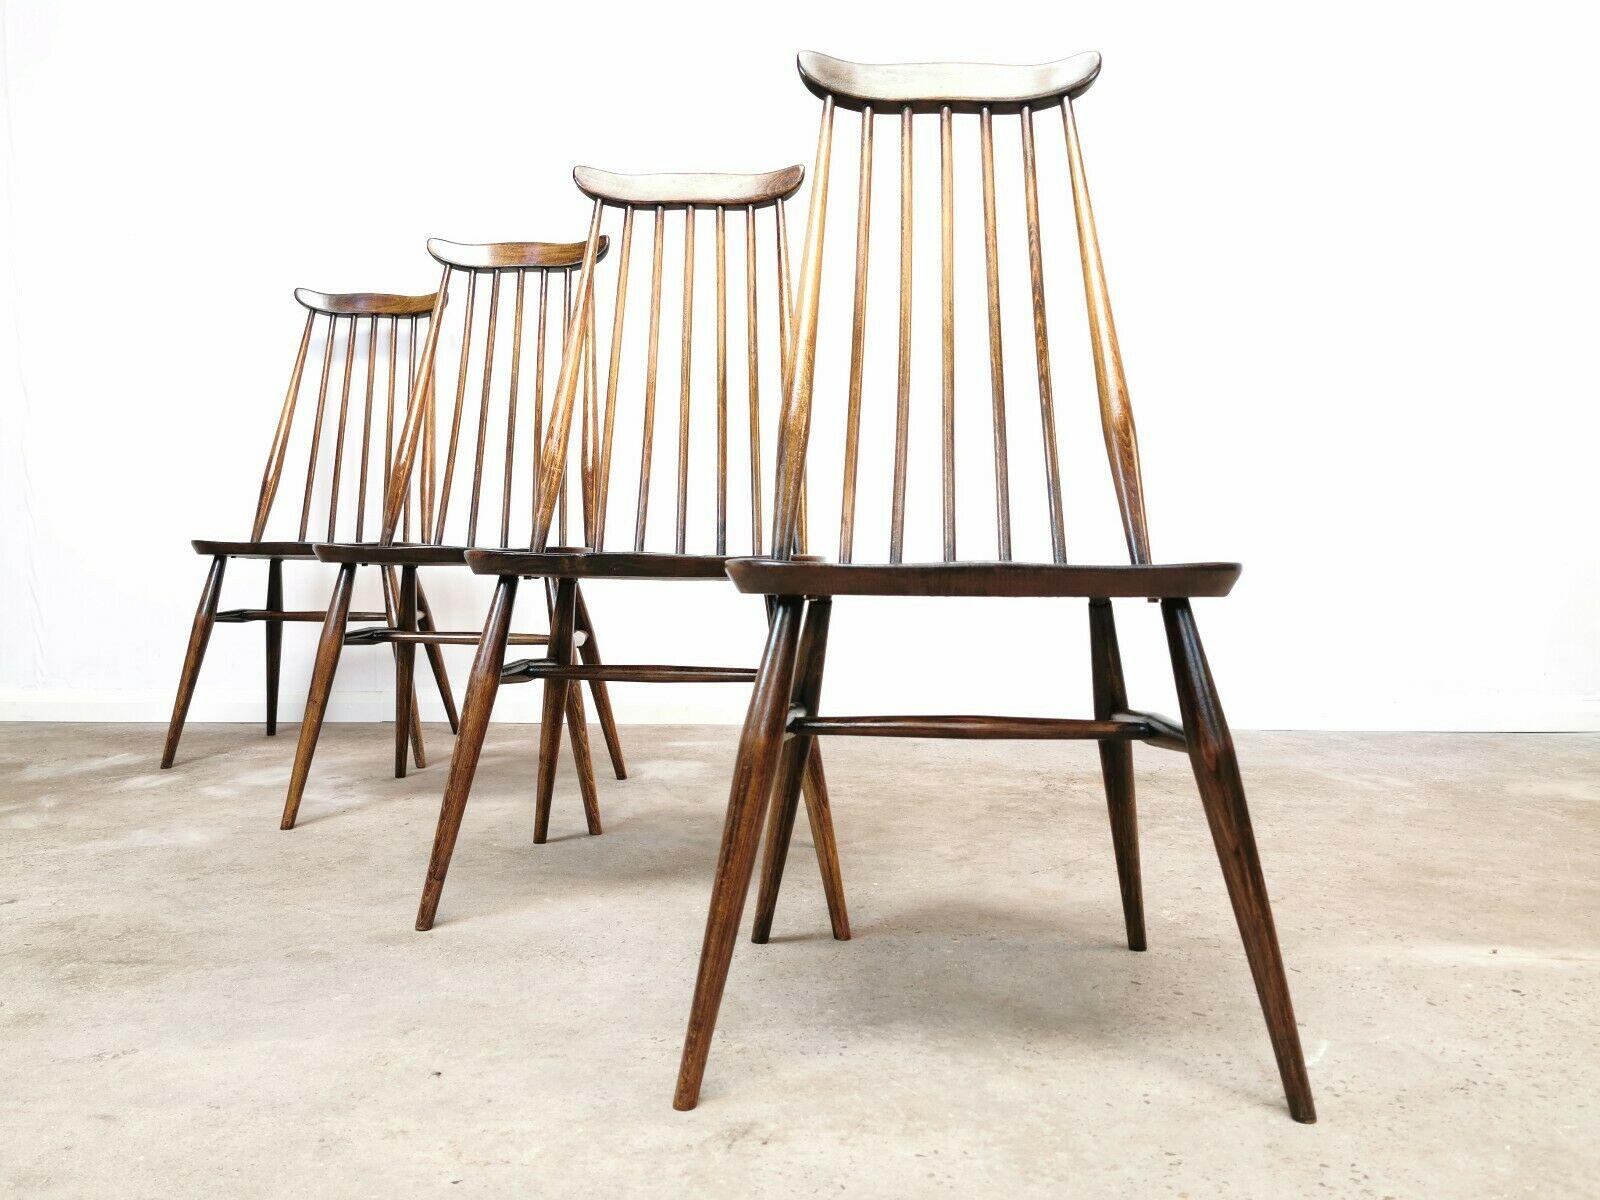 Four Ercol Windsor Goldsmith dining chairs. Superb wood detail and colour.

1960s. Elm and beechwood.